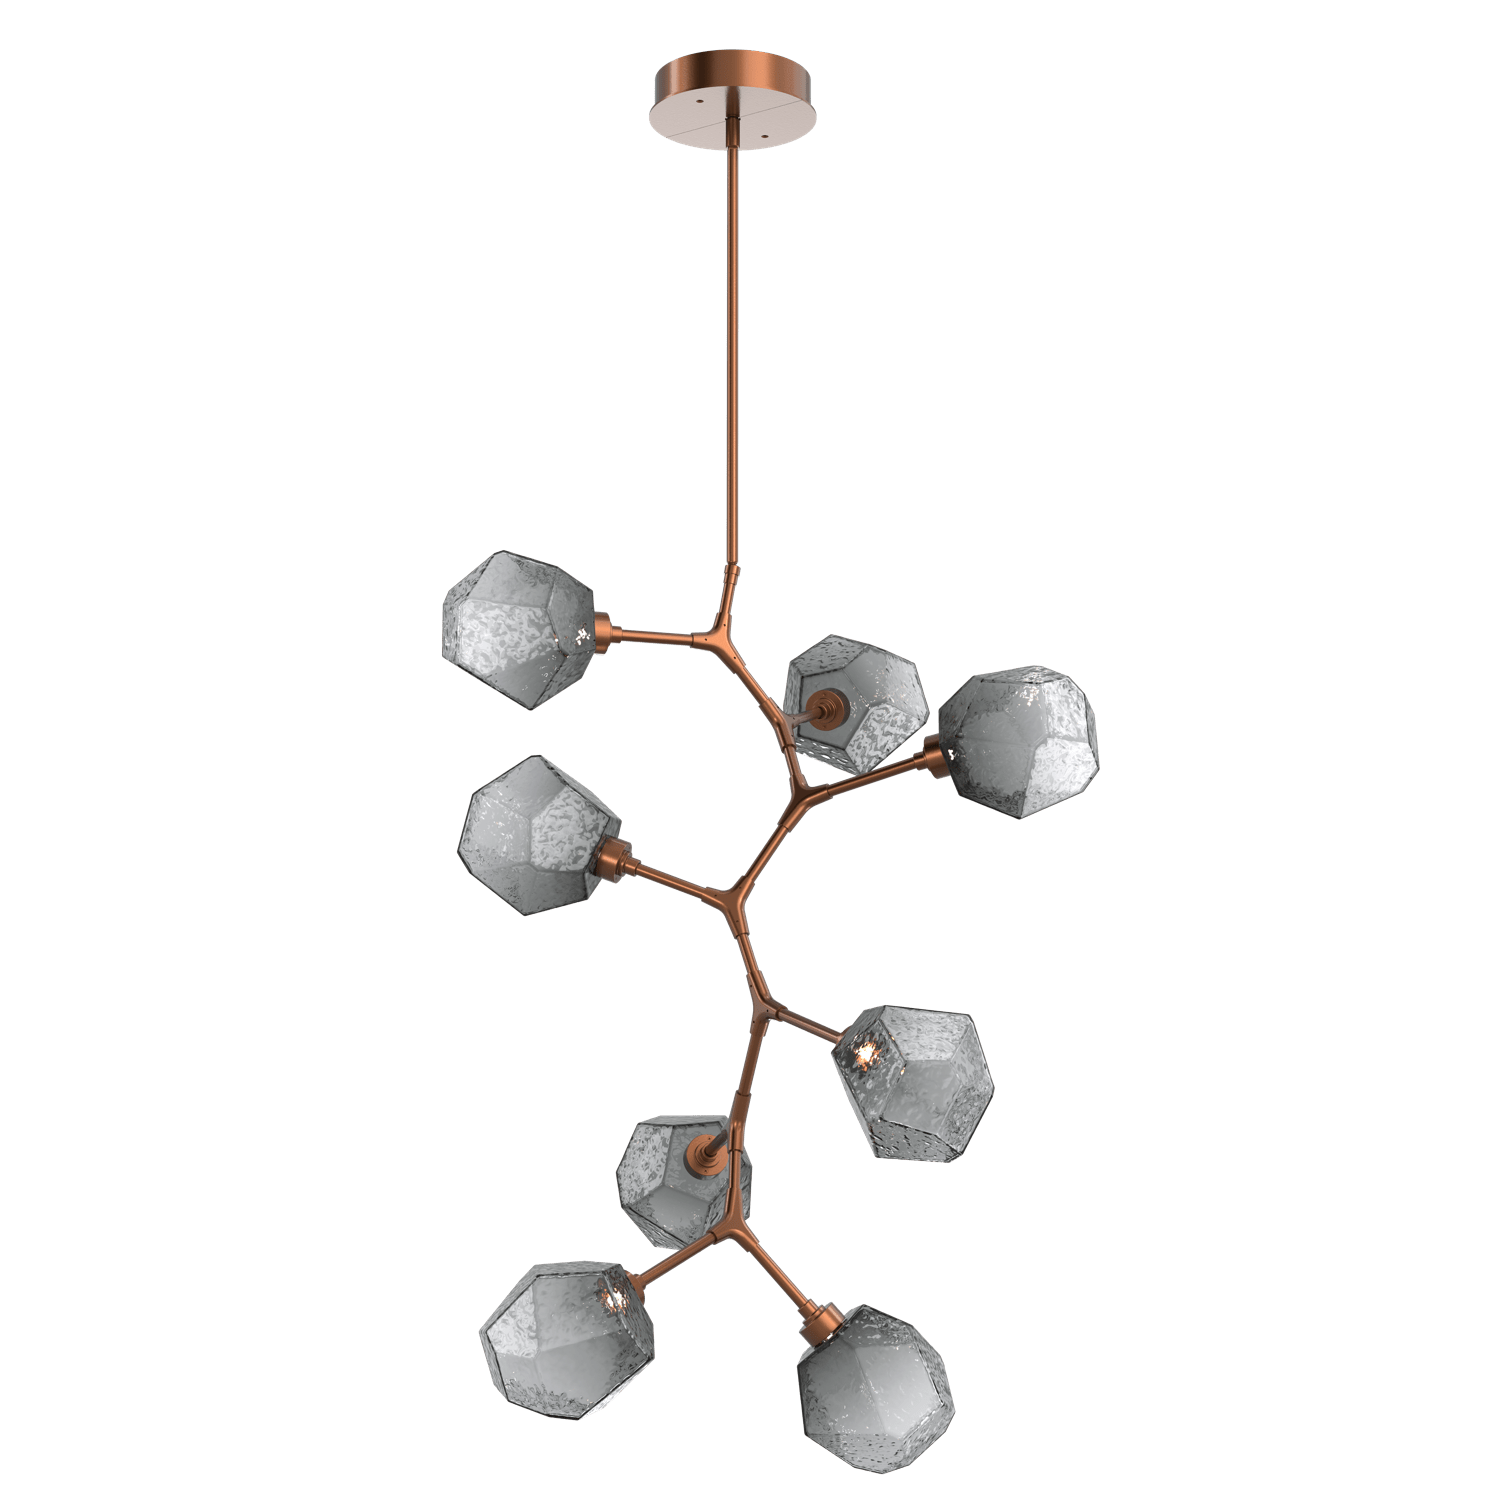 CHB0039-VB-BB-S-Hammerton-Studio-Gem-8-light-modern-vine-chandelier-with-burnished-bronze-finish-and-smoke-blown-glass-shades-and-LED-lamping